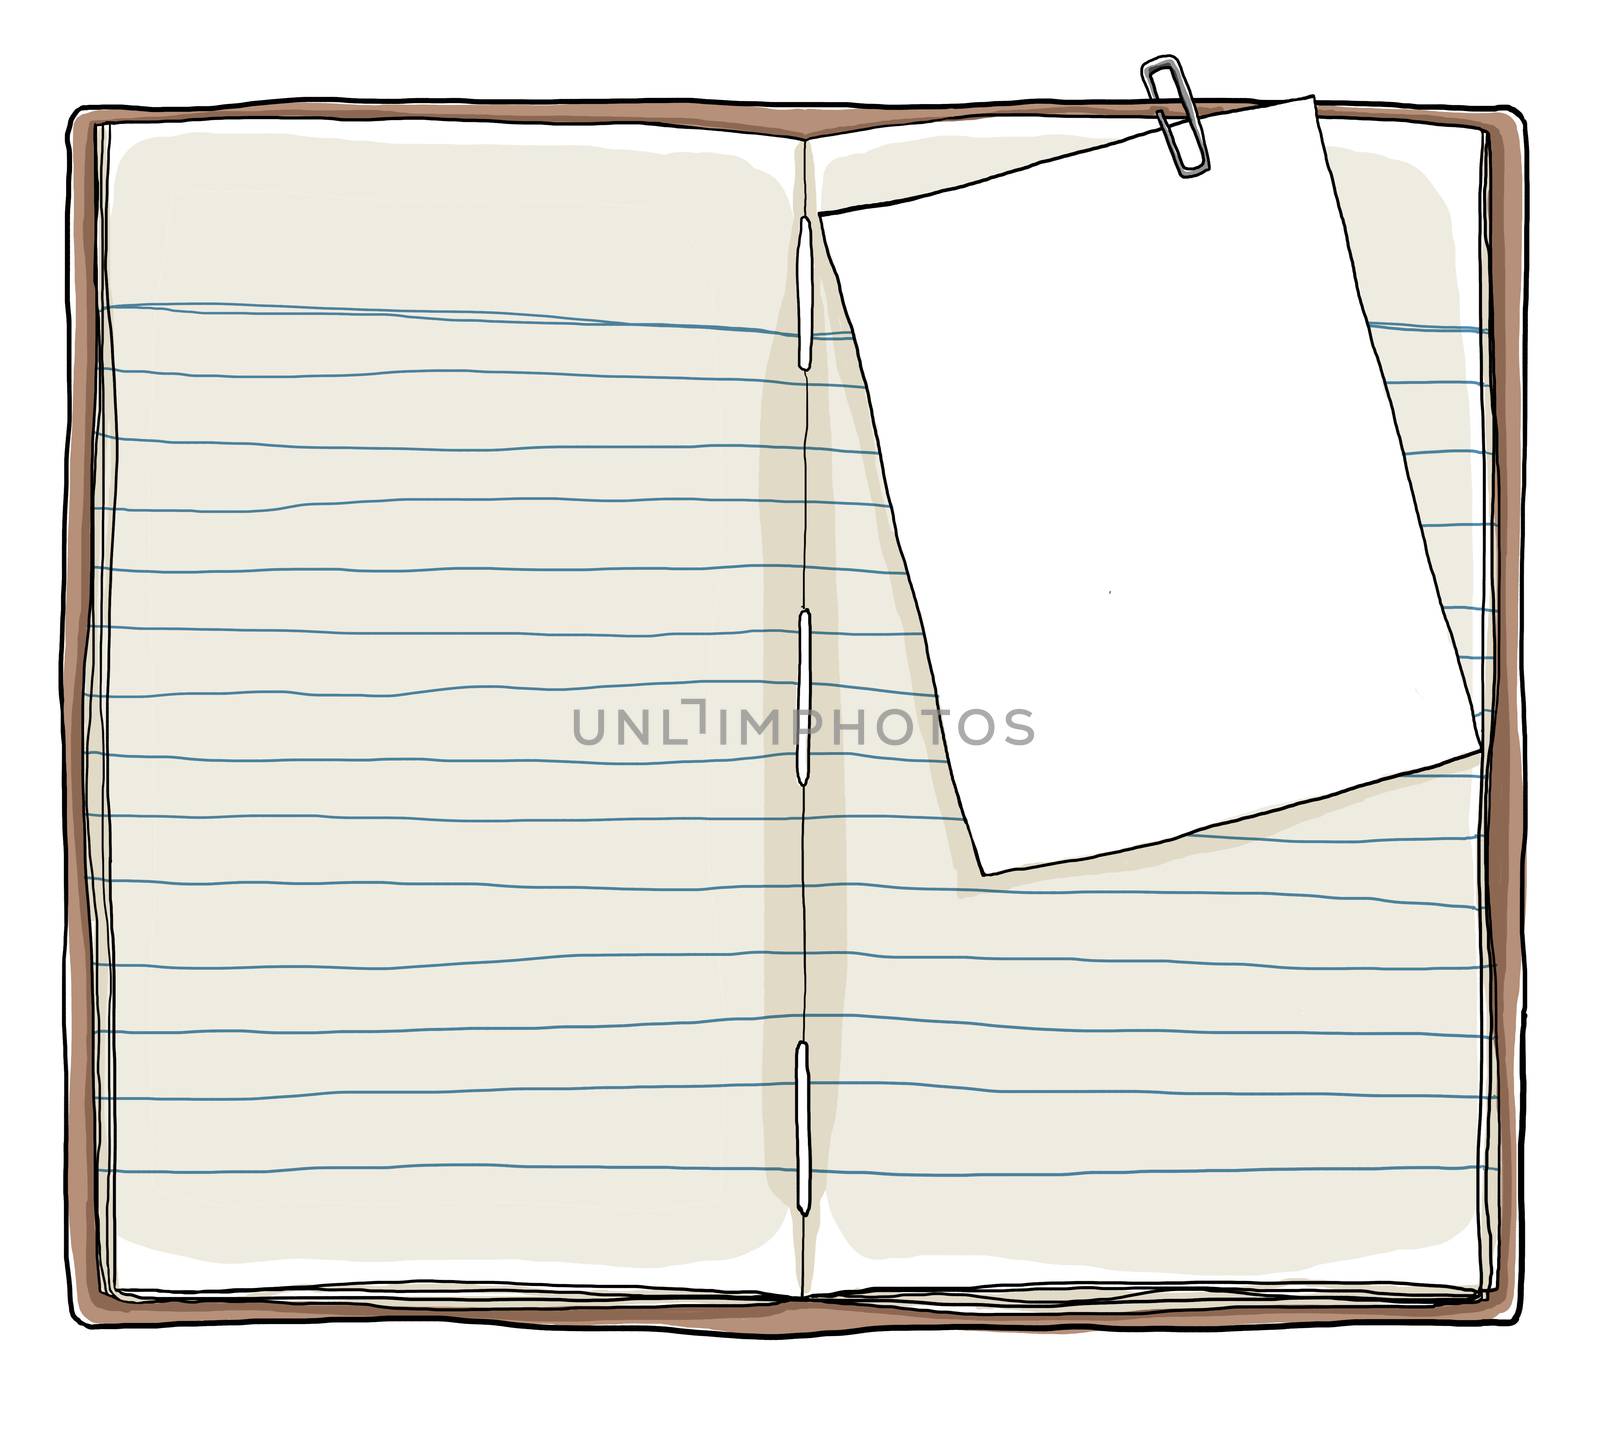 book vintage and Memo notes with paper clip art background